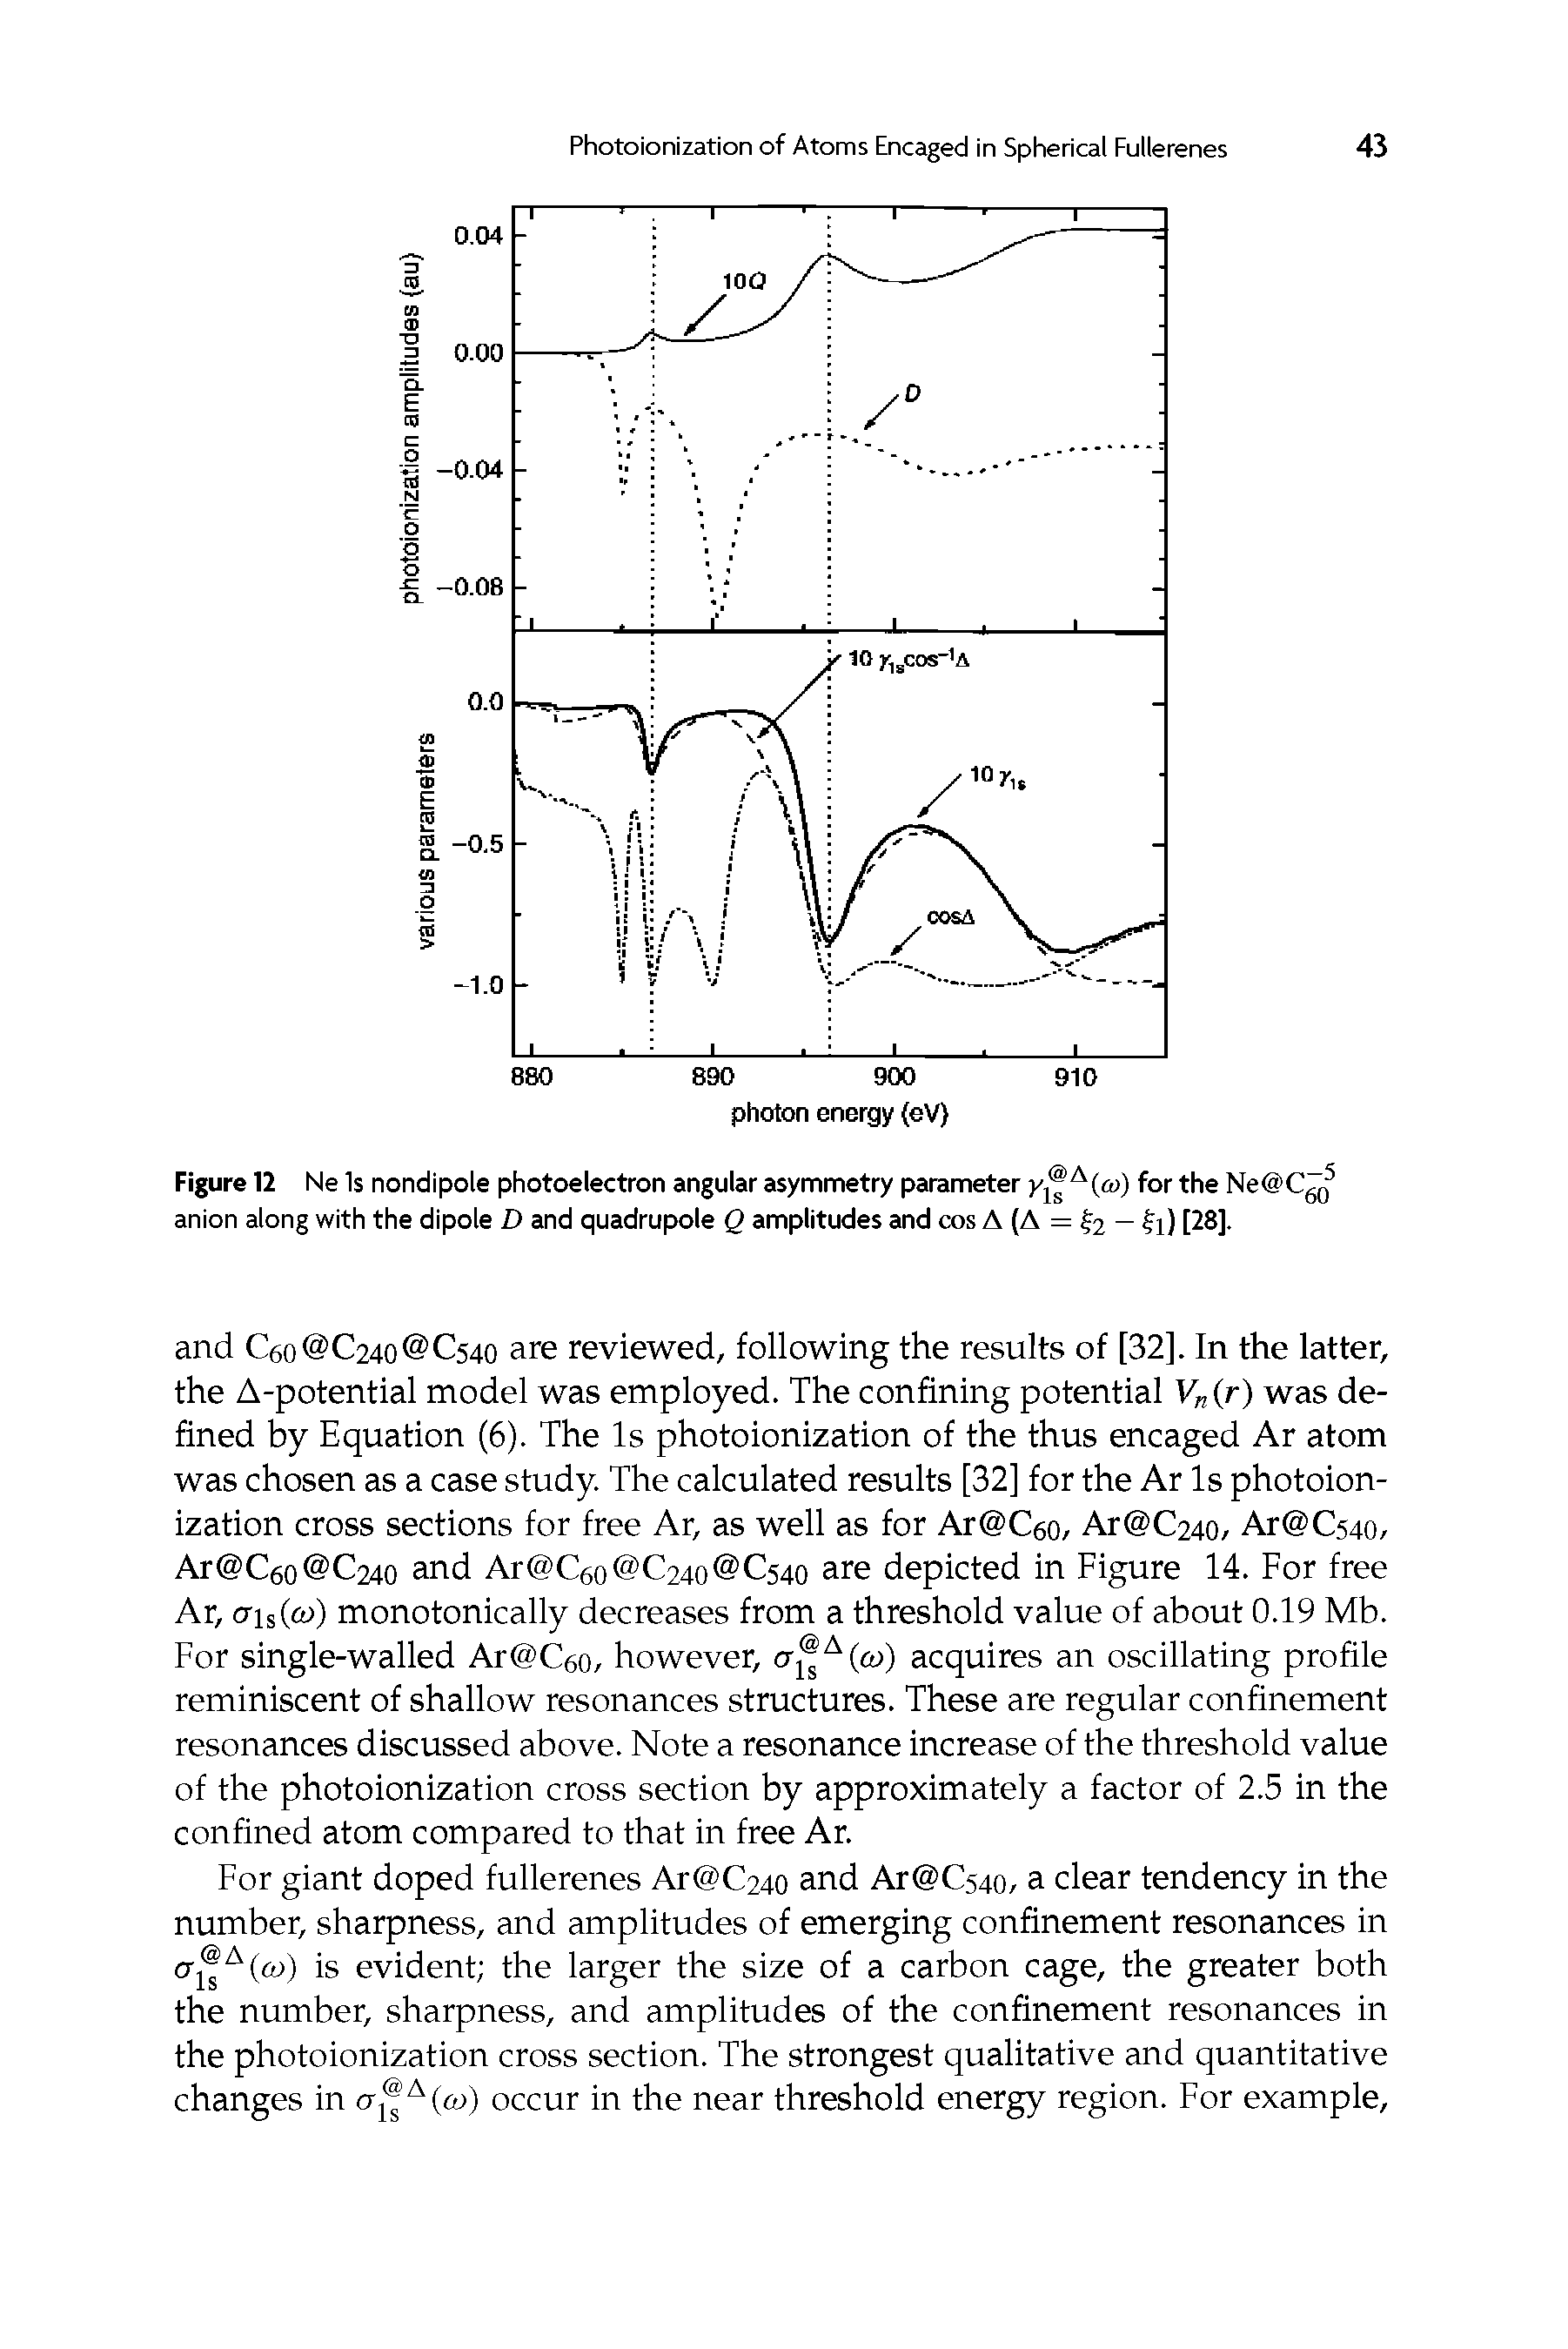 Figure 12 Ne Is nondipole photoelectron angular asymmetry parameter y A(a>) for the Ne C605 anion along with the dipole D and quadrupole Q amplitudes and cos A (A = 2 — ti) [28].